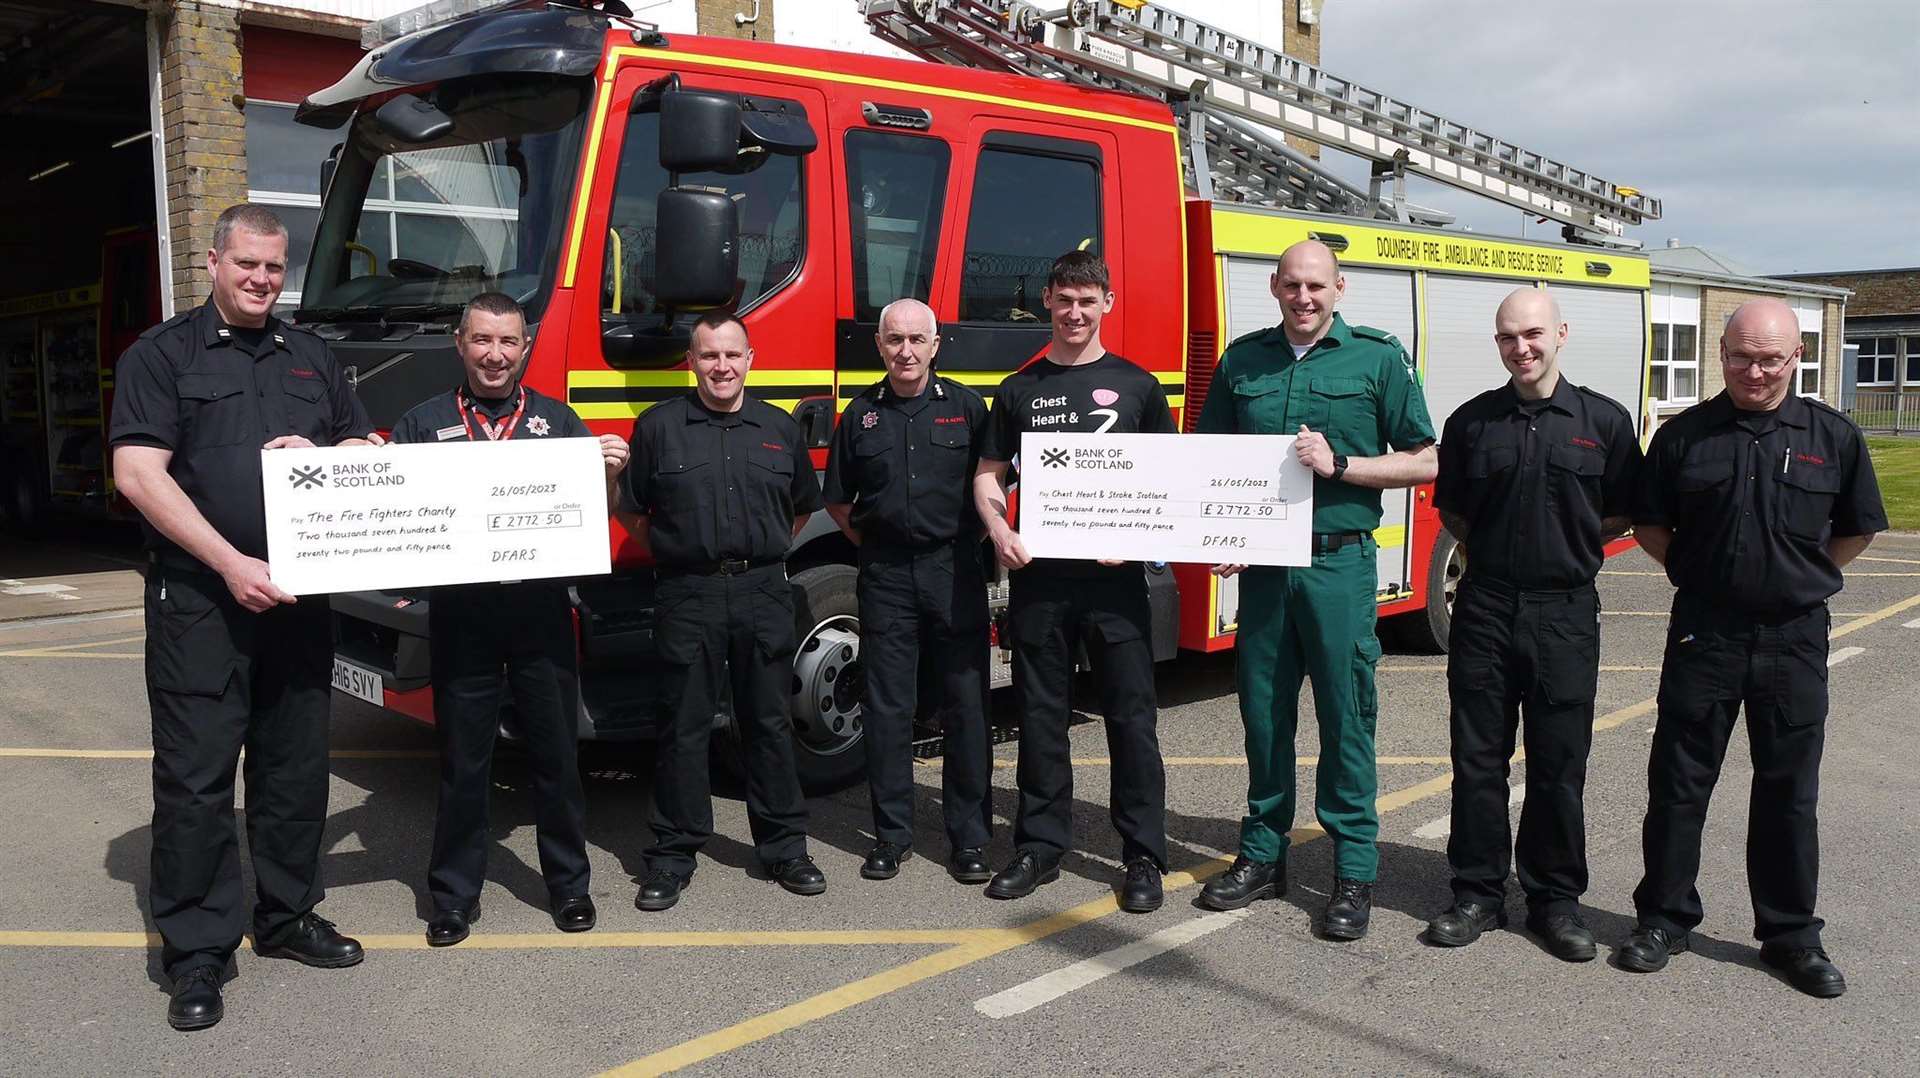 Kevin Oag (left) presents a cheque for £2772.50 to the Fire Fighters Charity representative for the Highlands, Dougie Campbell, while Craig Anderson (third from right) hands a cheque for the same amount to Jake Anderson on behalf of Chest, Heart and Stroke Scotland.